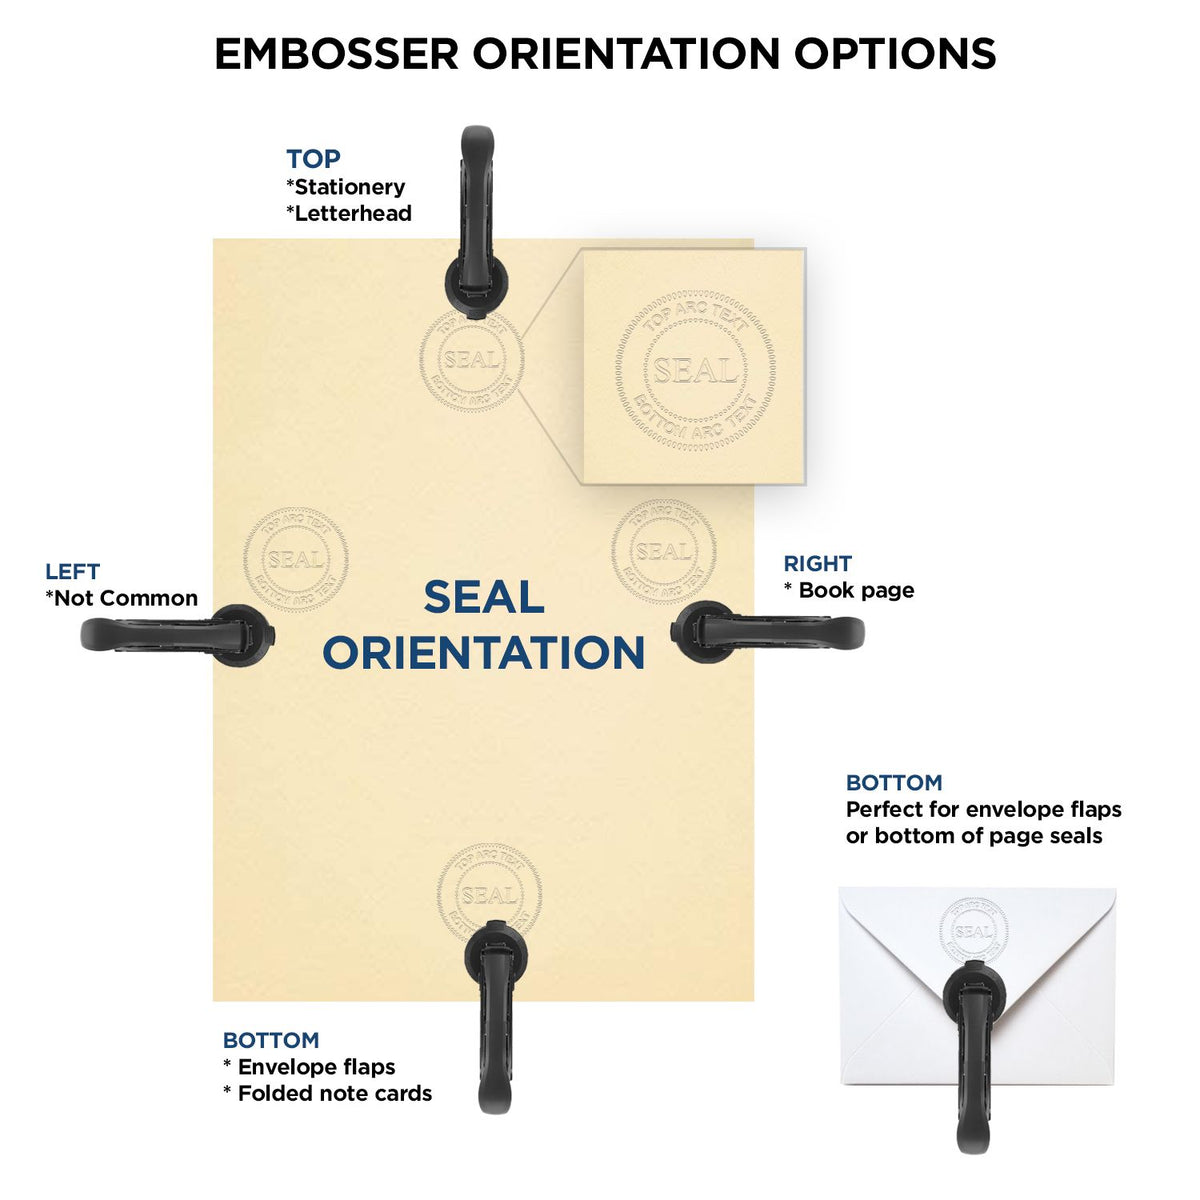 An infographic for the Gift New York Land Surveyor Seal showing embosser orientation, this is showing examples of a top, bottom, right and left insert.